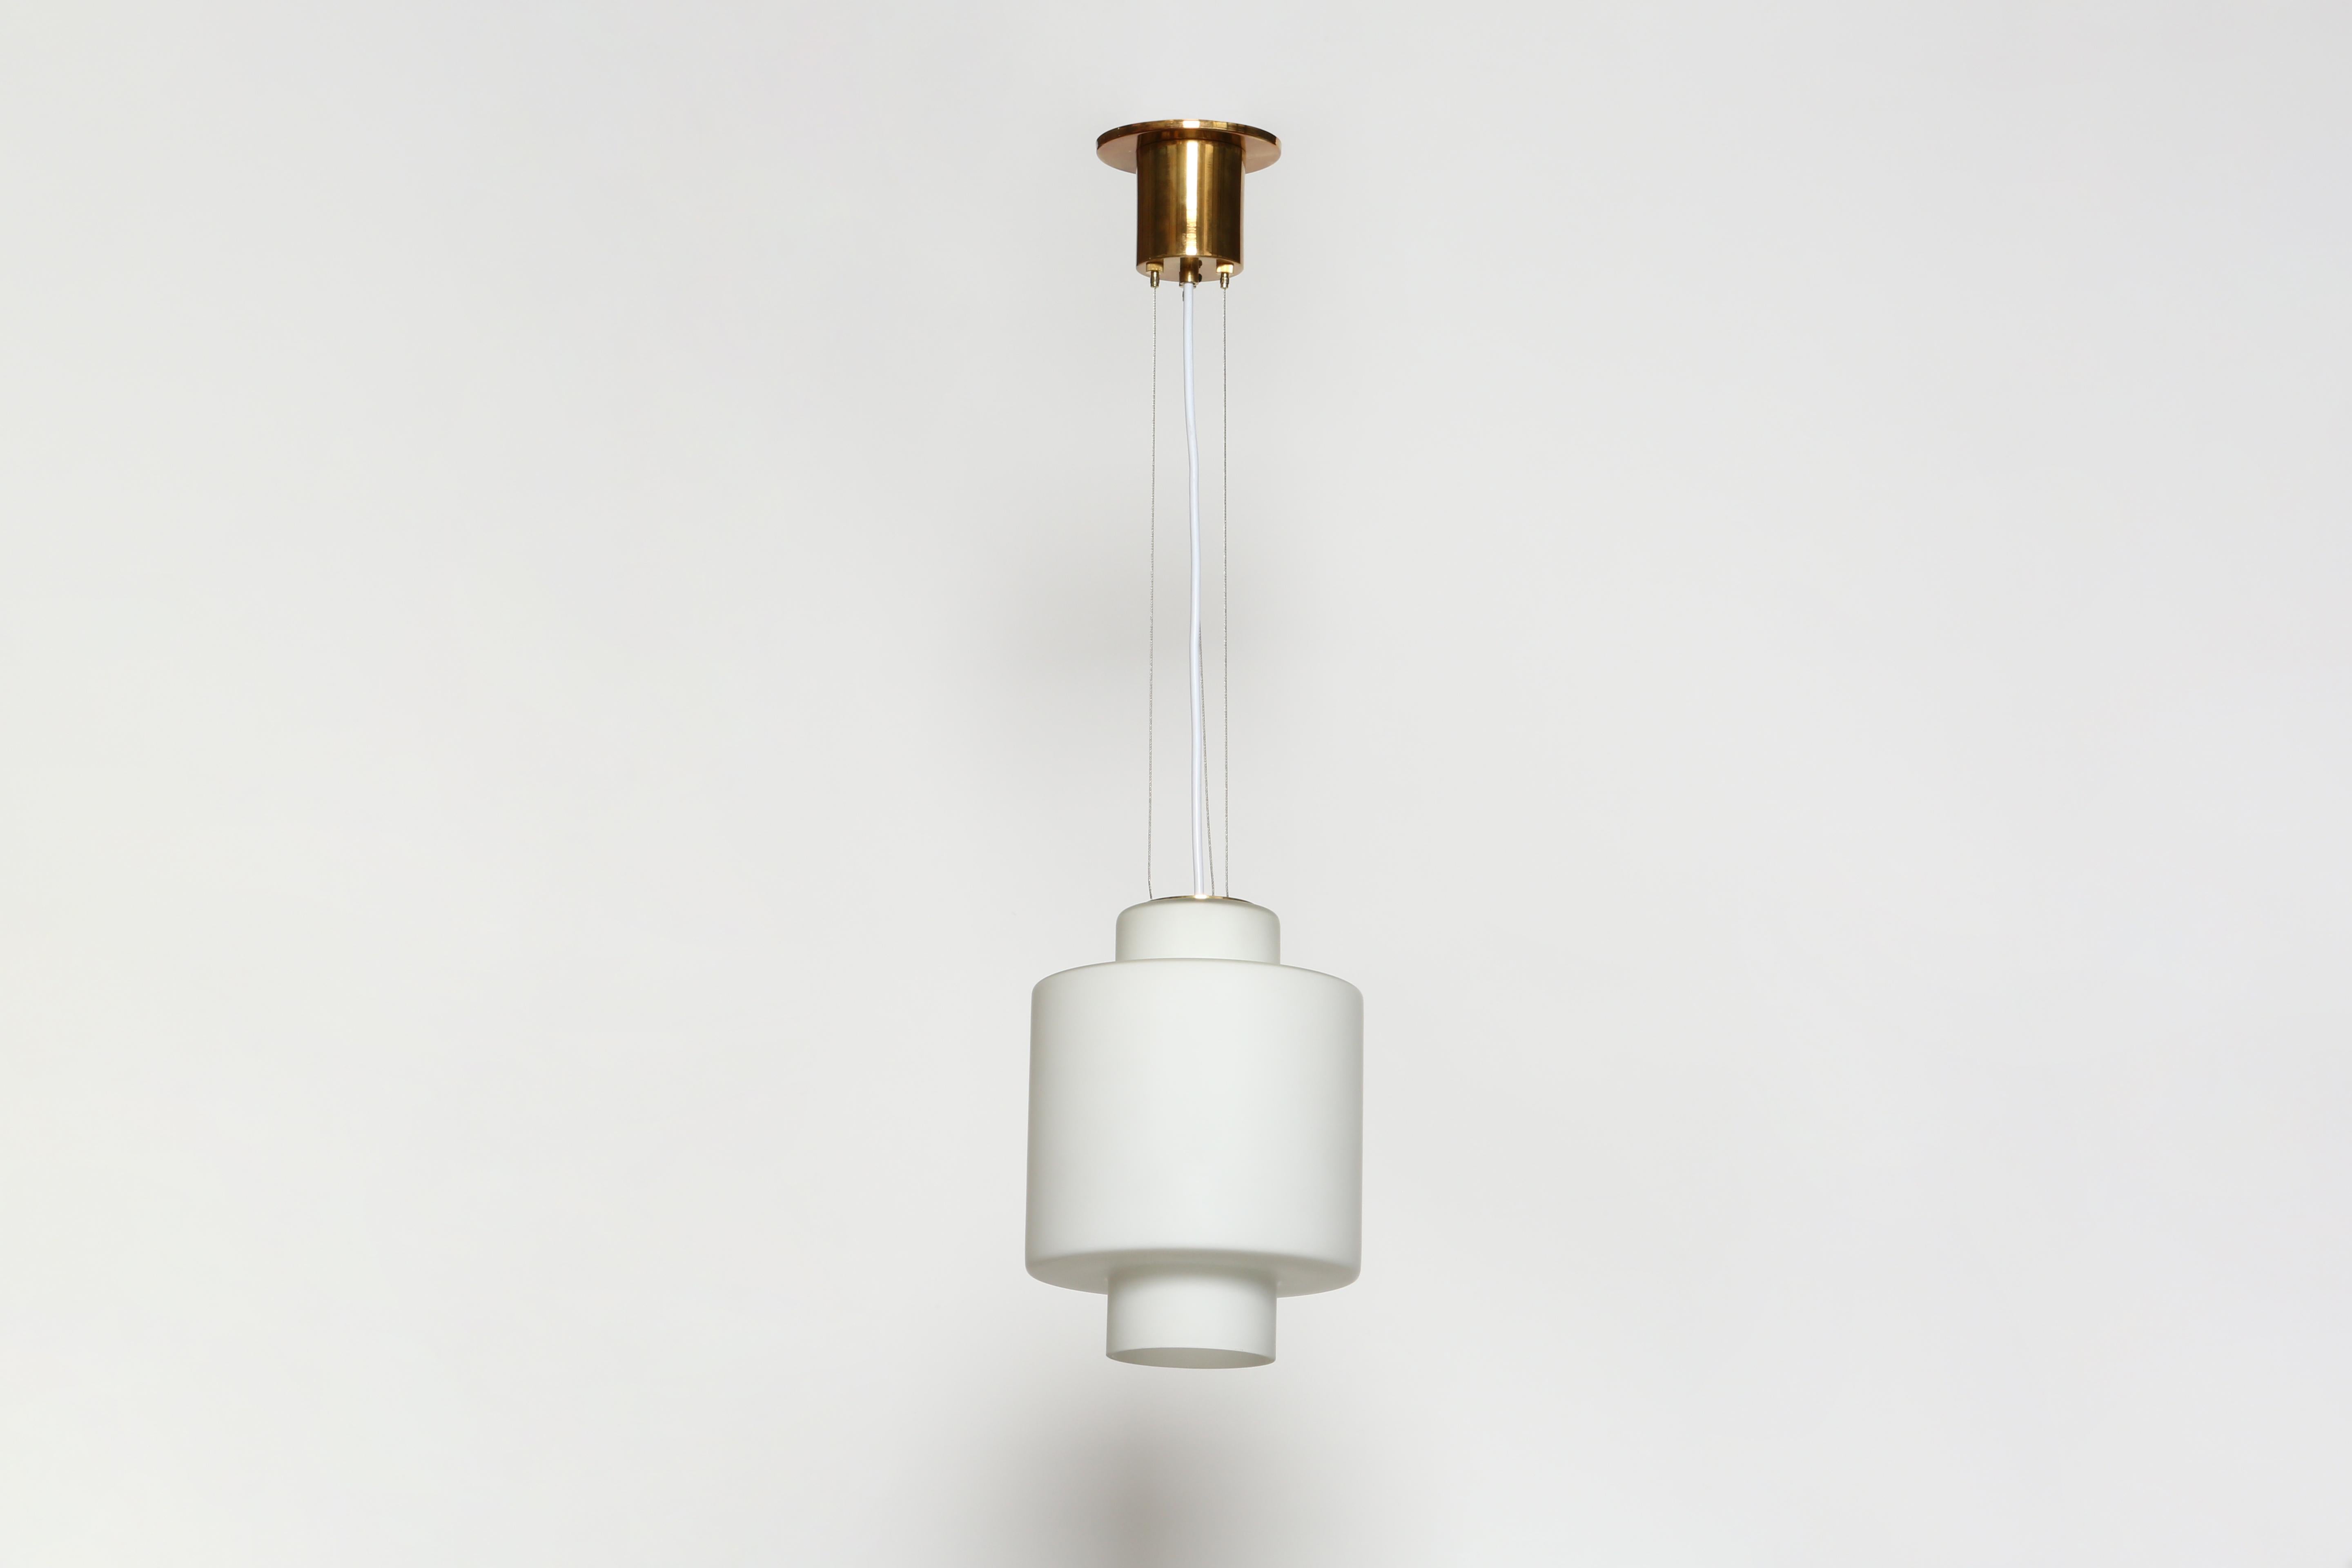 Stilnovo ceiling pendant
Designed and made in Italy, 1960s
Opaline glass, brass
Rewired for US
Takes one medium base bulb 
Overall drop is adjustable.
Height of the glass is 12 inches